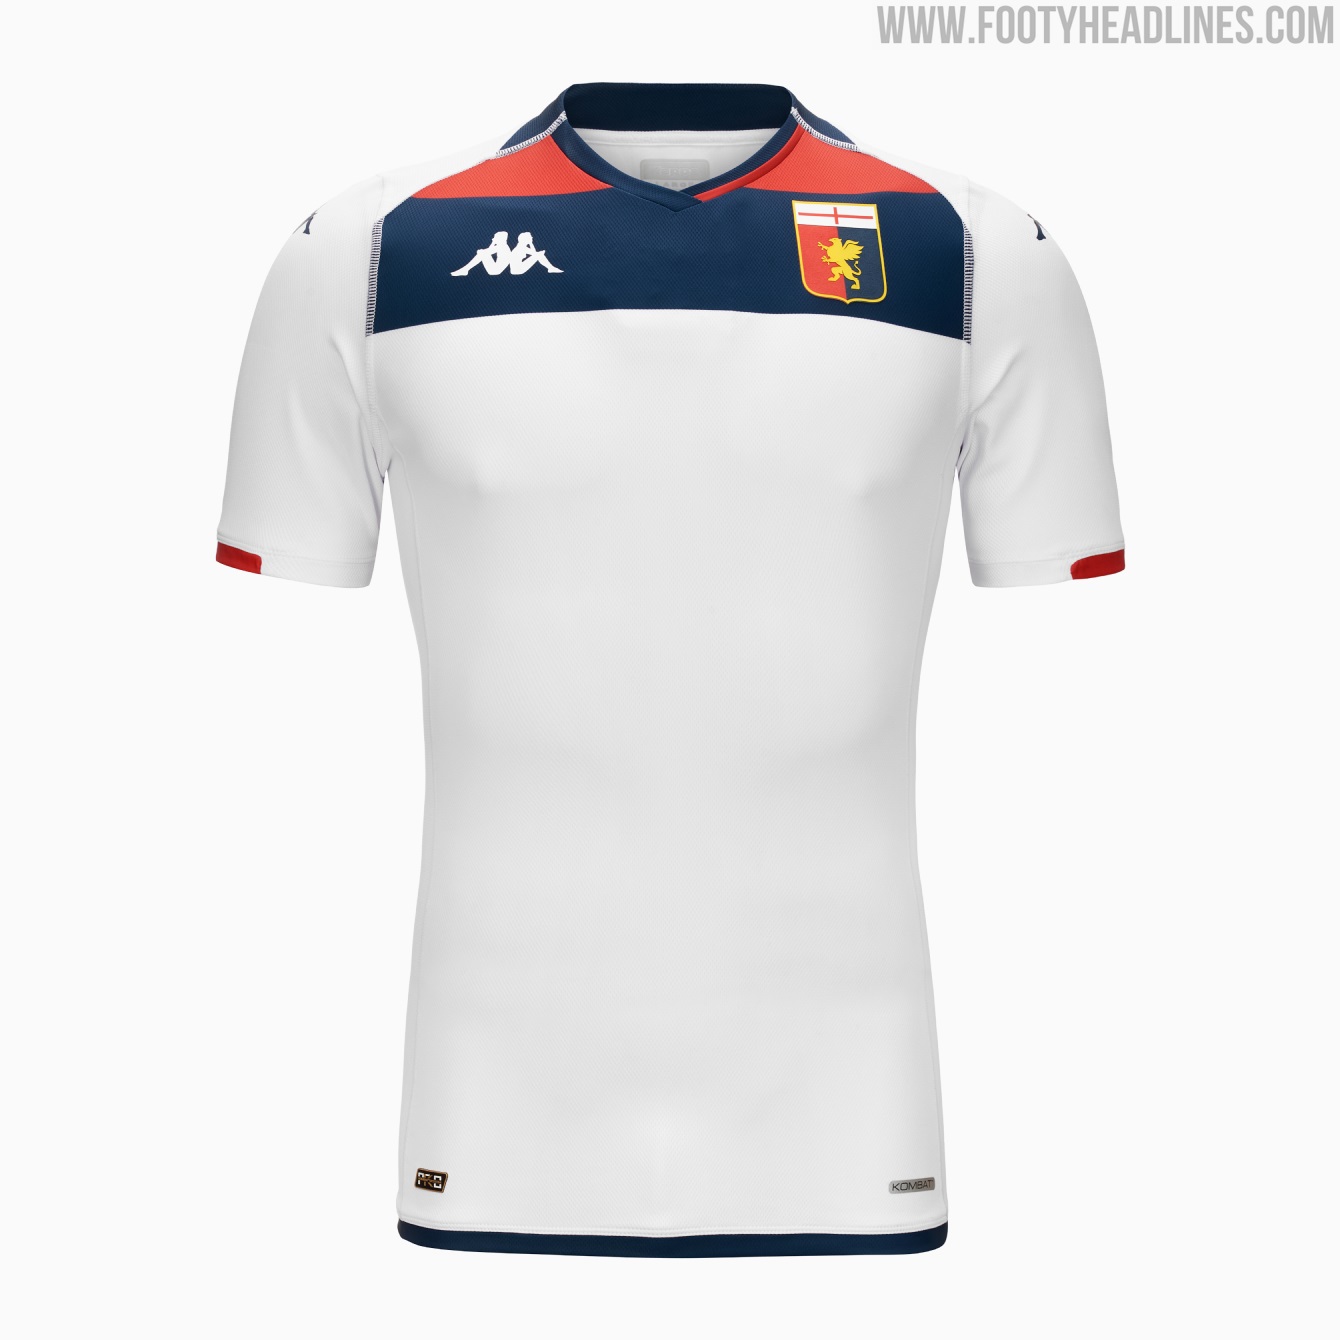 Genoa CFC Reveal Special 130th Anniversary Kit From Kappa